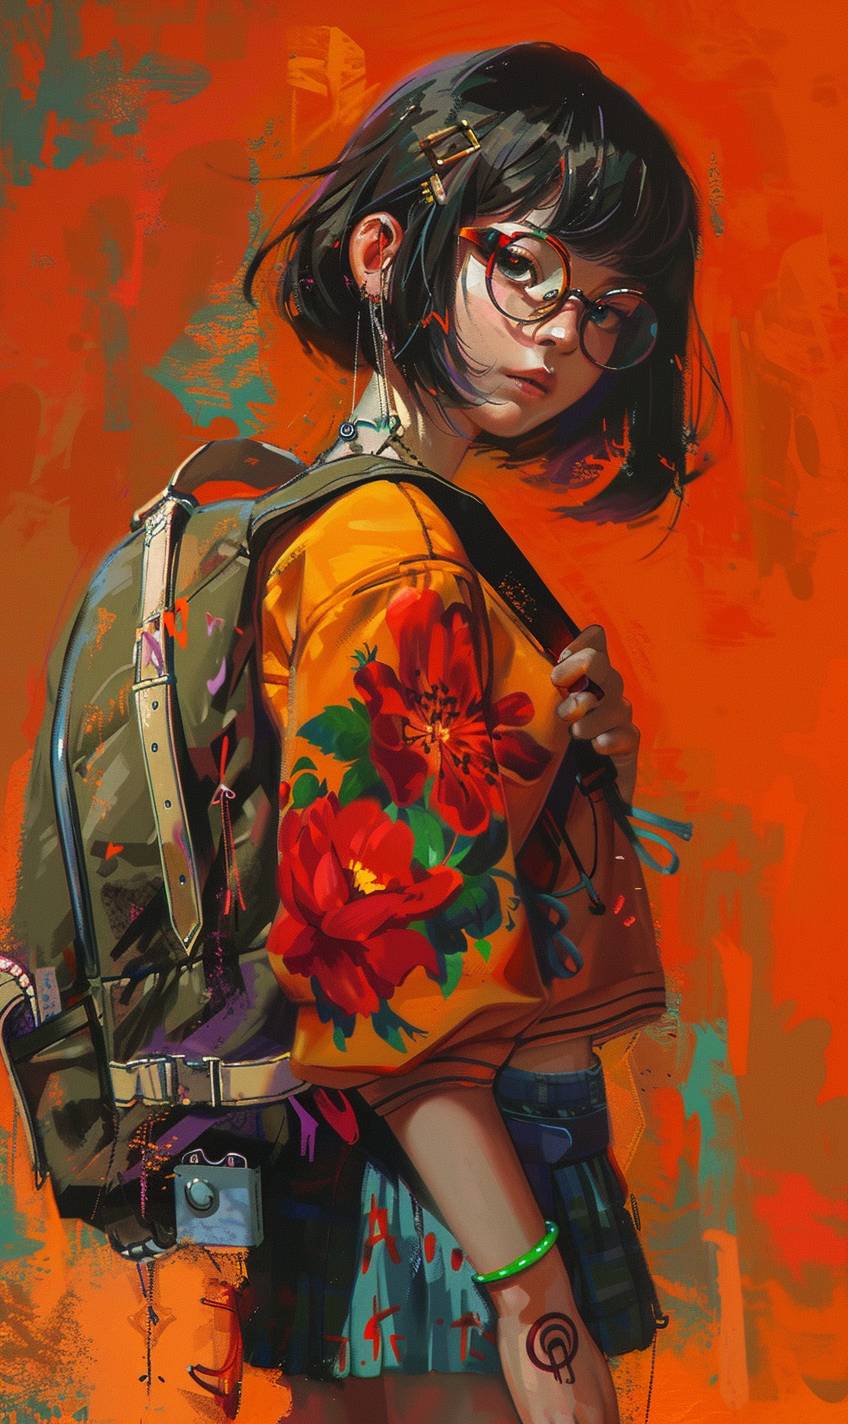 Anime schoolgirl with short black hair and glasses, wearing colorful clothing and holding a backpack. The background is a vibrant orange color with dark hues. The schoolgirl has a large red flower tattooed across her chest, giving the overall composition an edgy feel.